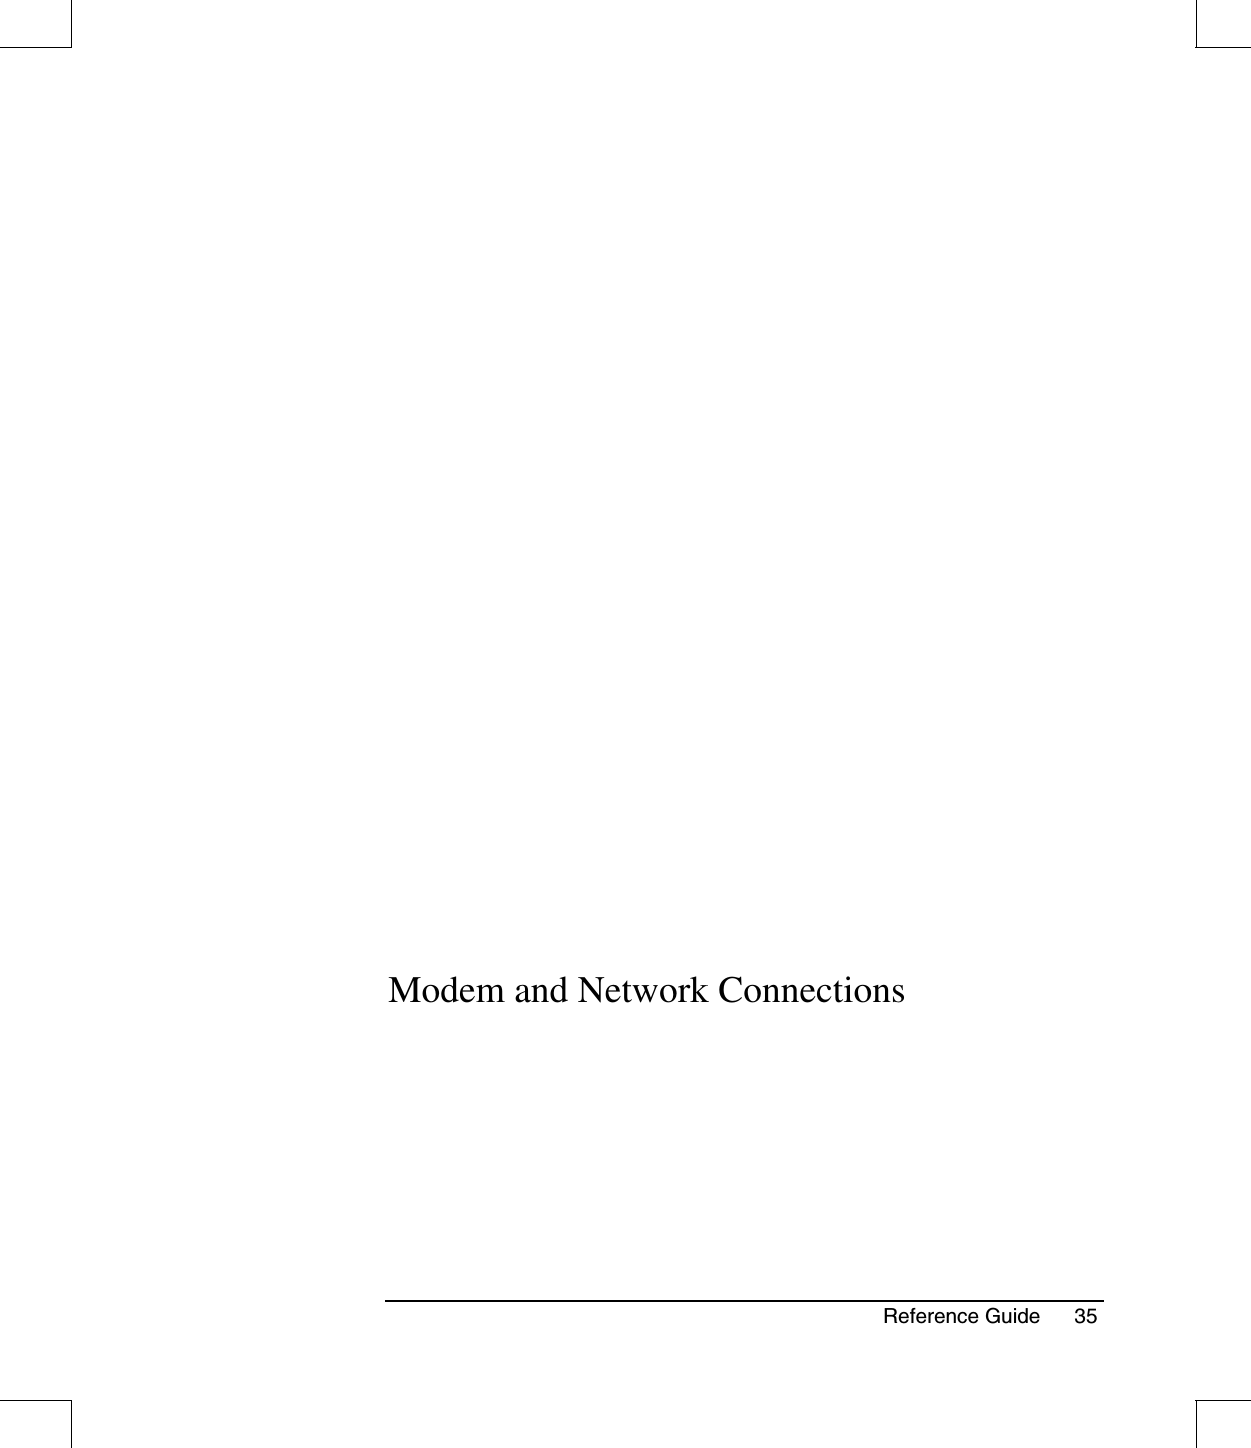 Reference Guide 35Modem and Network Connections